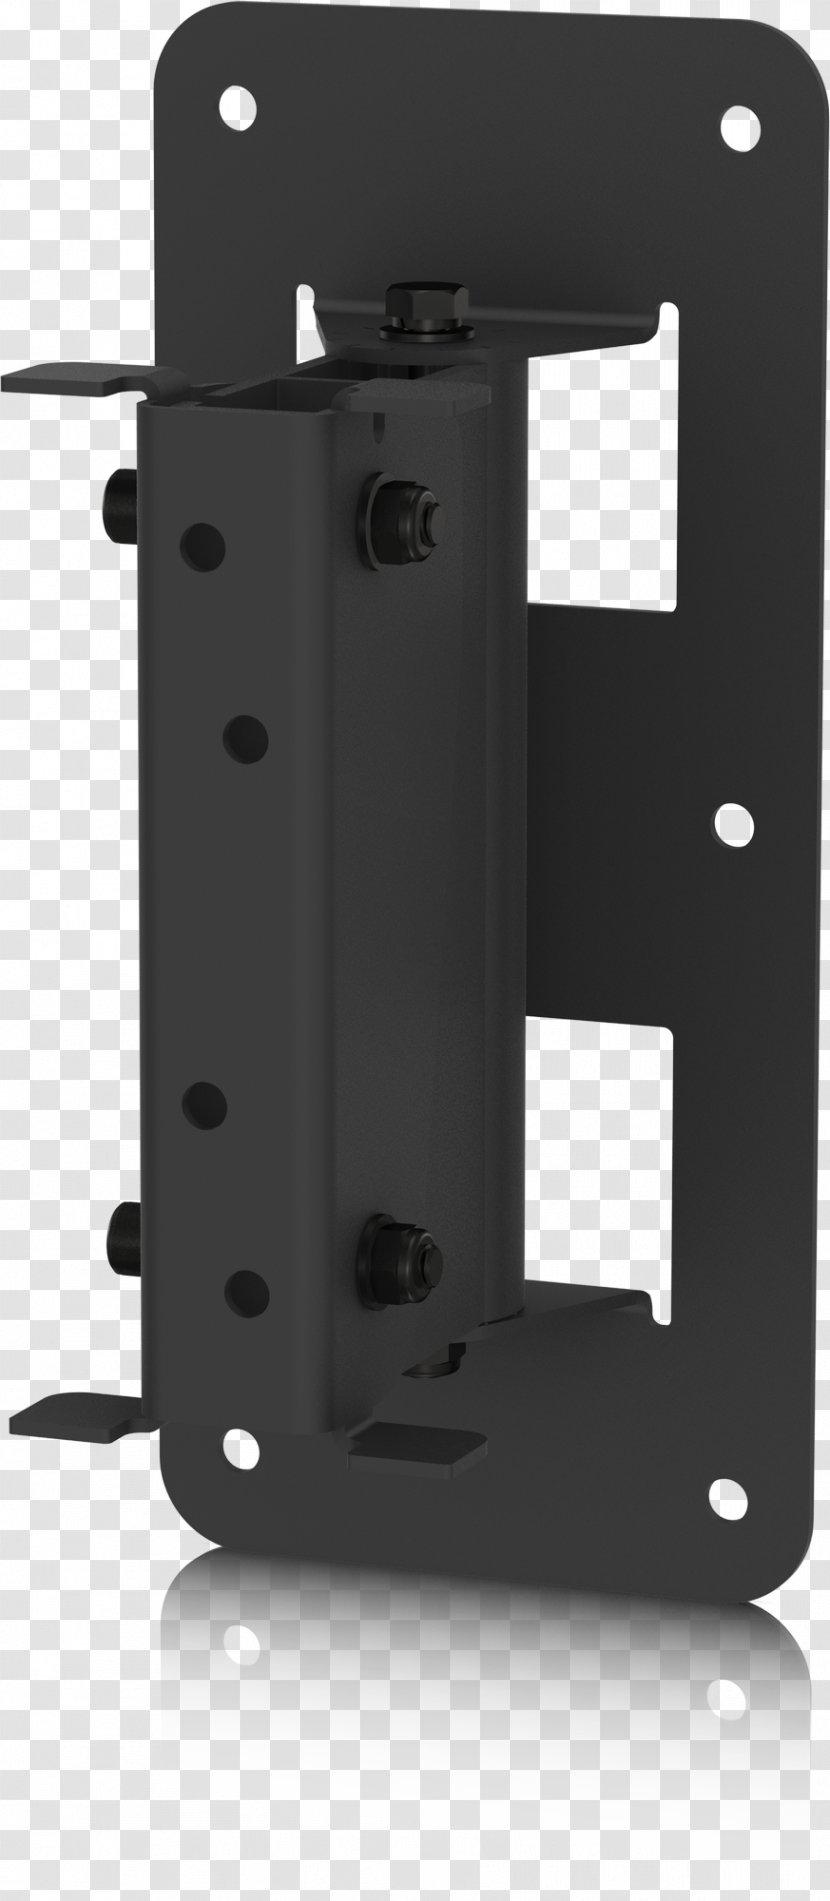 Loudspeaker Tannoy Product Design Angle - Hardware Accessory - Computer Transparent PNG